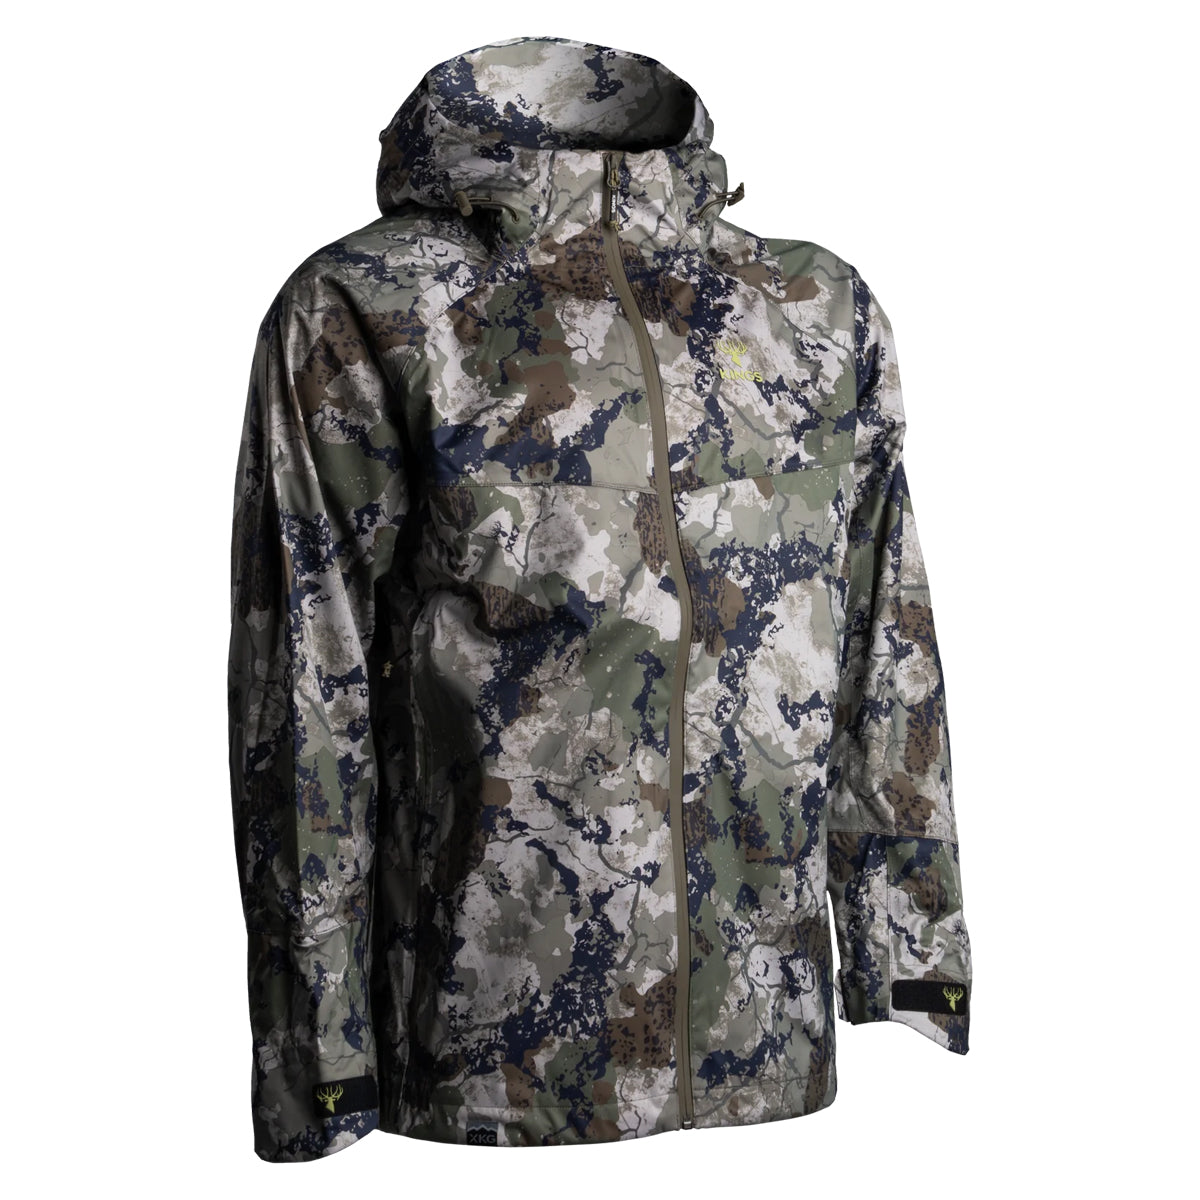 King's XKG Paramount Rain Jacket in  by GOHUNT | King's - GOHUNT Shop